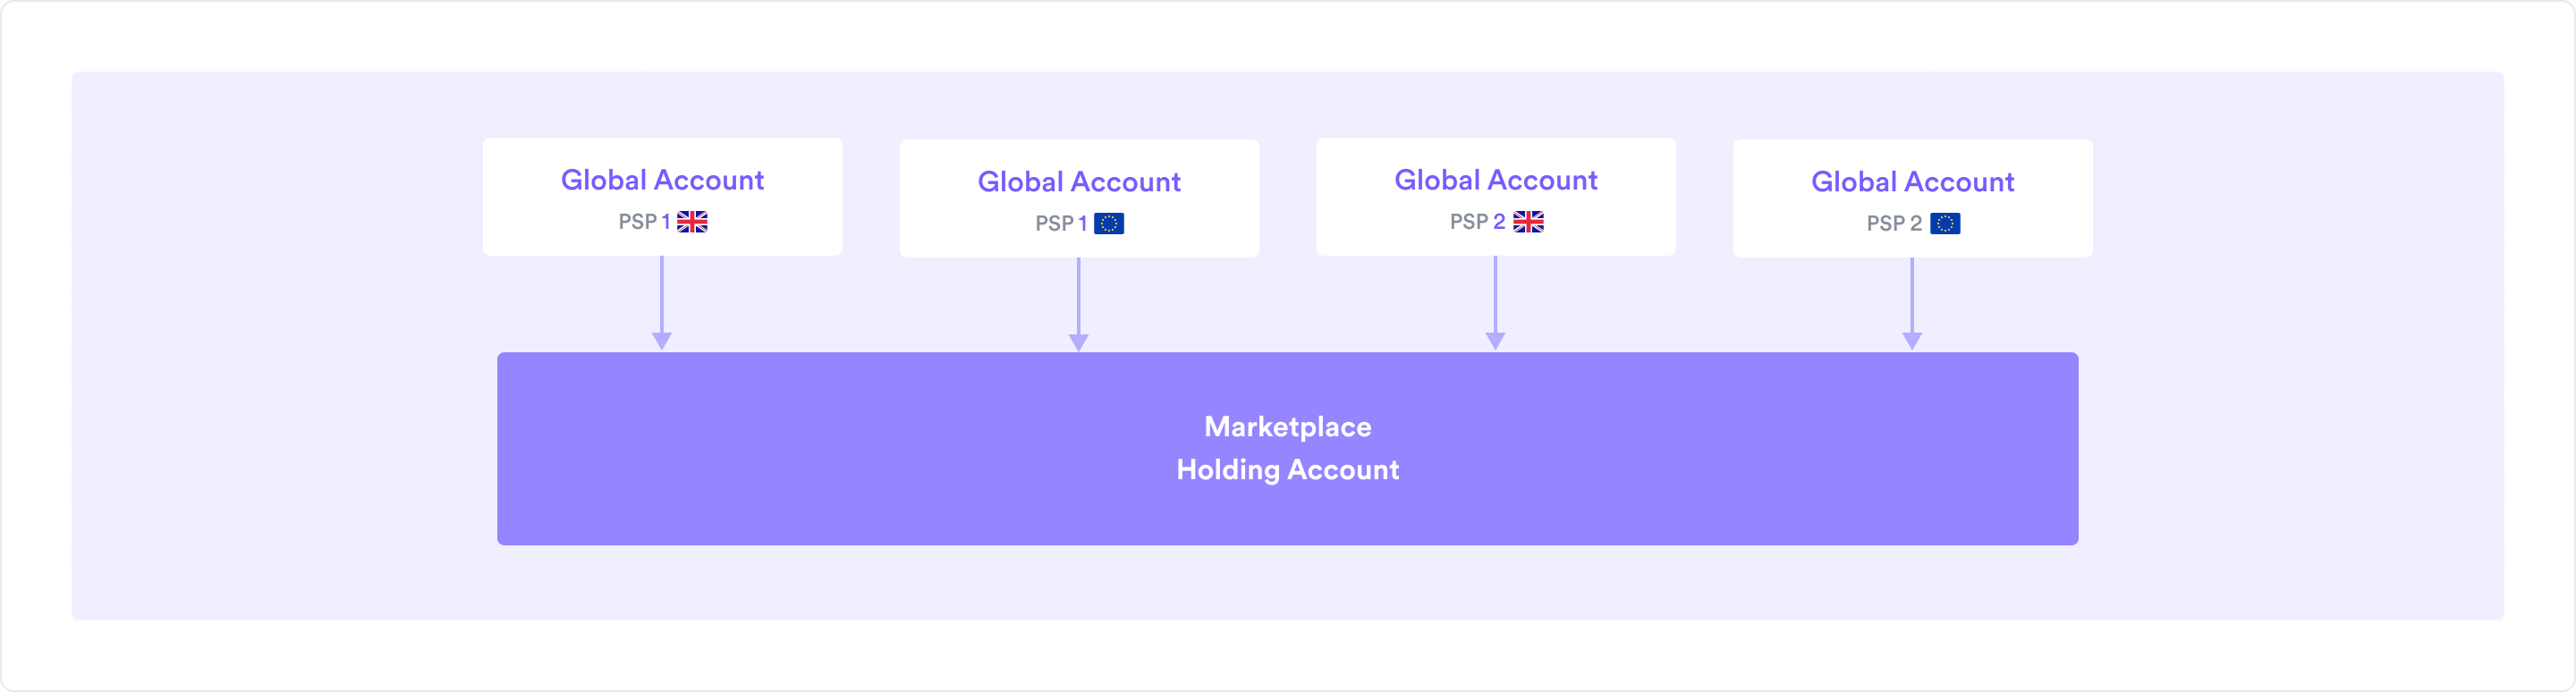 PSP settlement holding account and global account